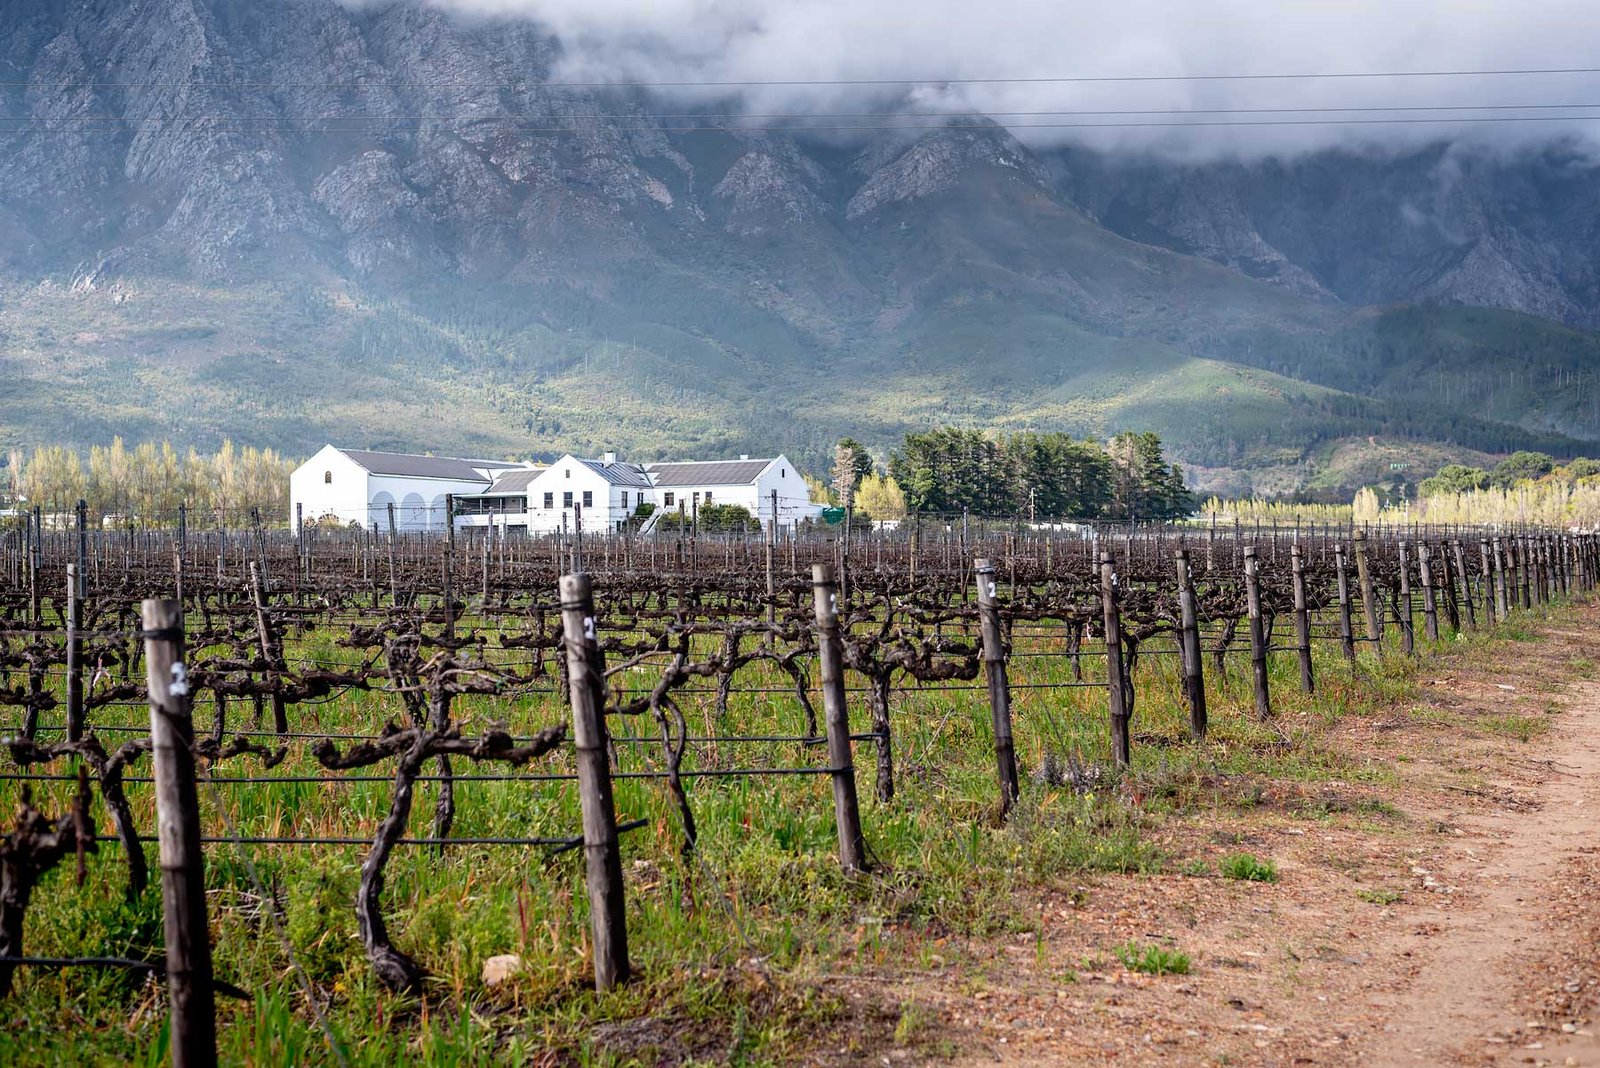 Winelands, Franschhoek. South Africa in 3 Weeks | The Perfect South Africa itinerary for your first trip.